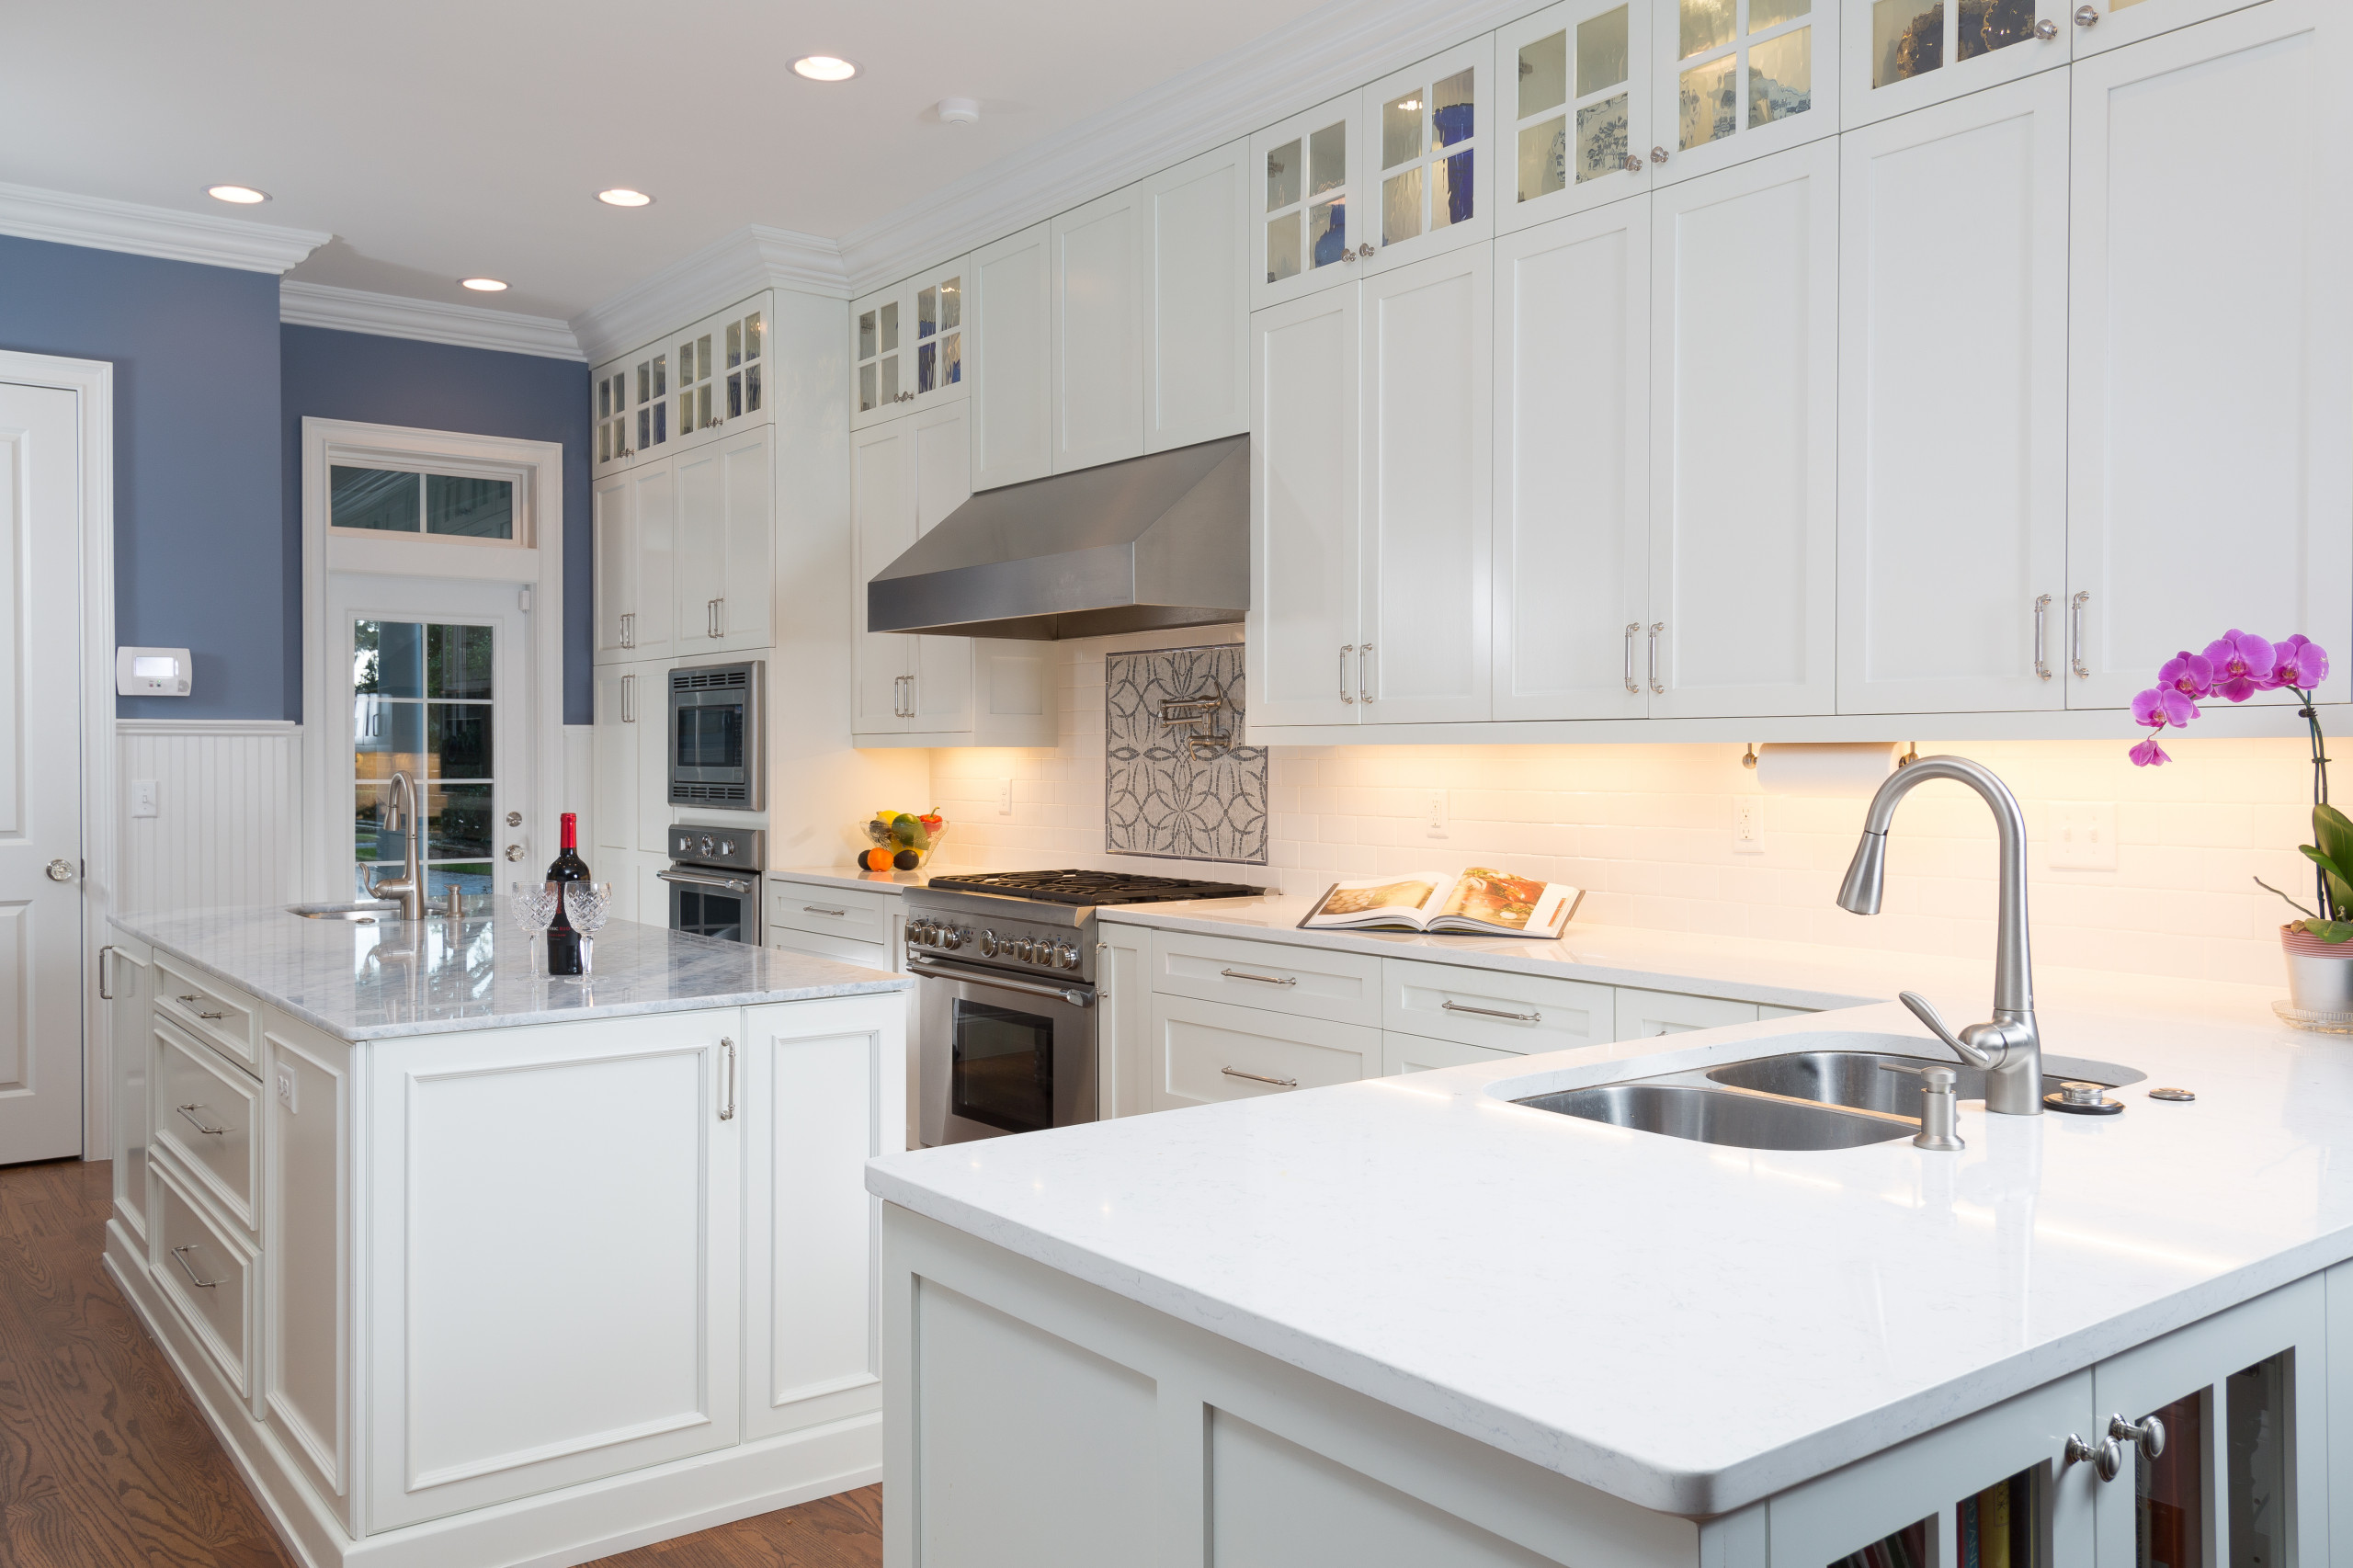 Inspiration for a timeless medium tone wood floor kitchen remodel in Jacksonville with a double-bowl sink, white backsplash, subway tile backsplash, stainless steel appliances and an island